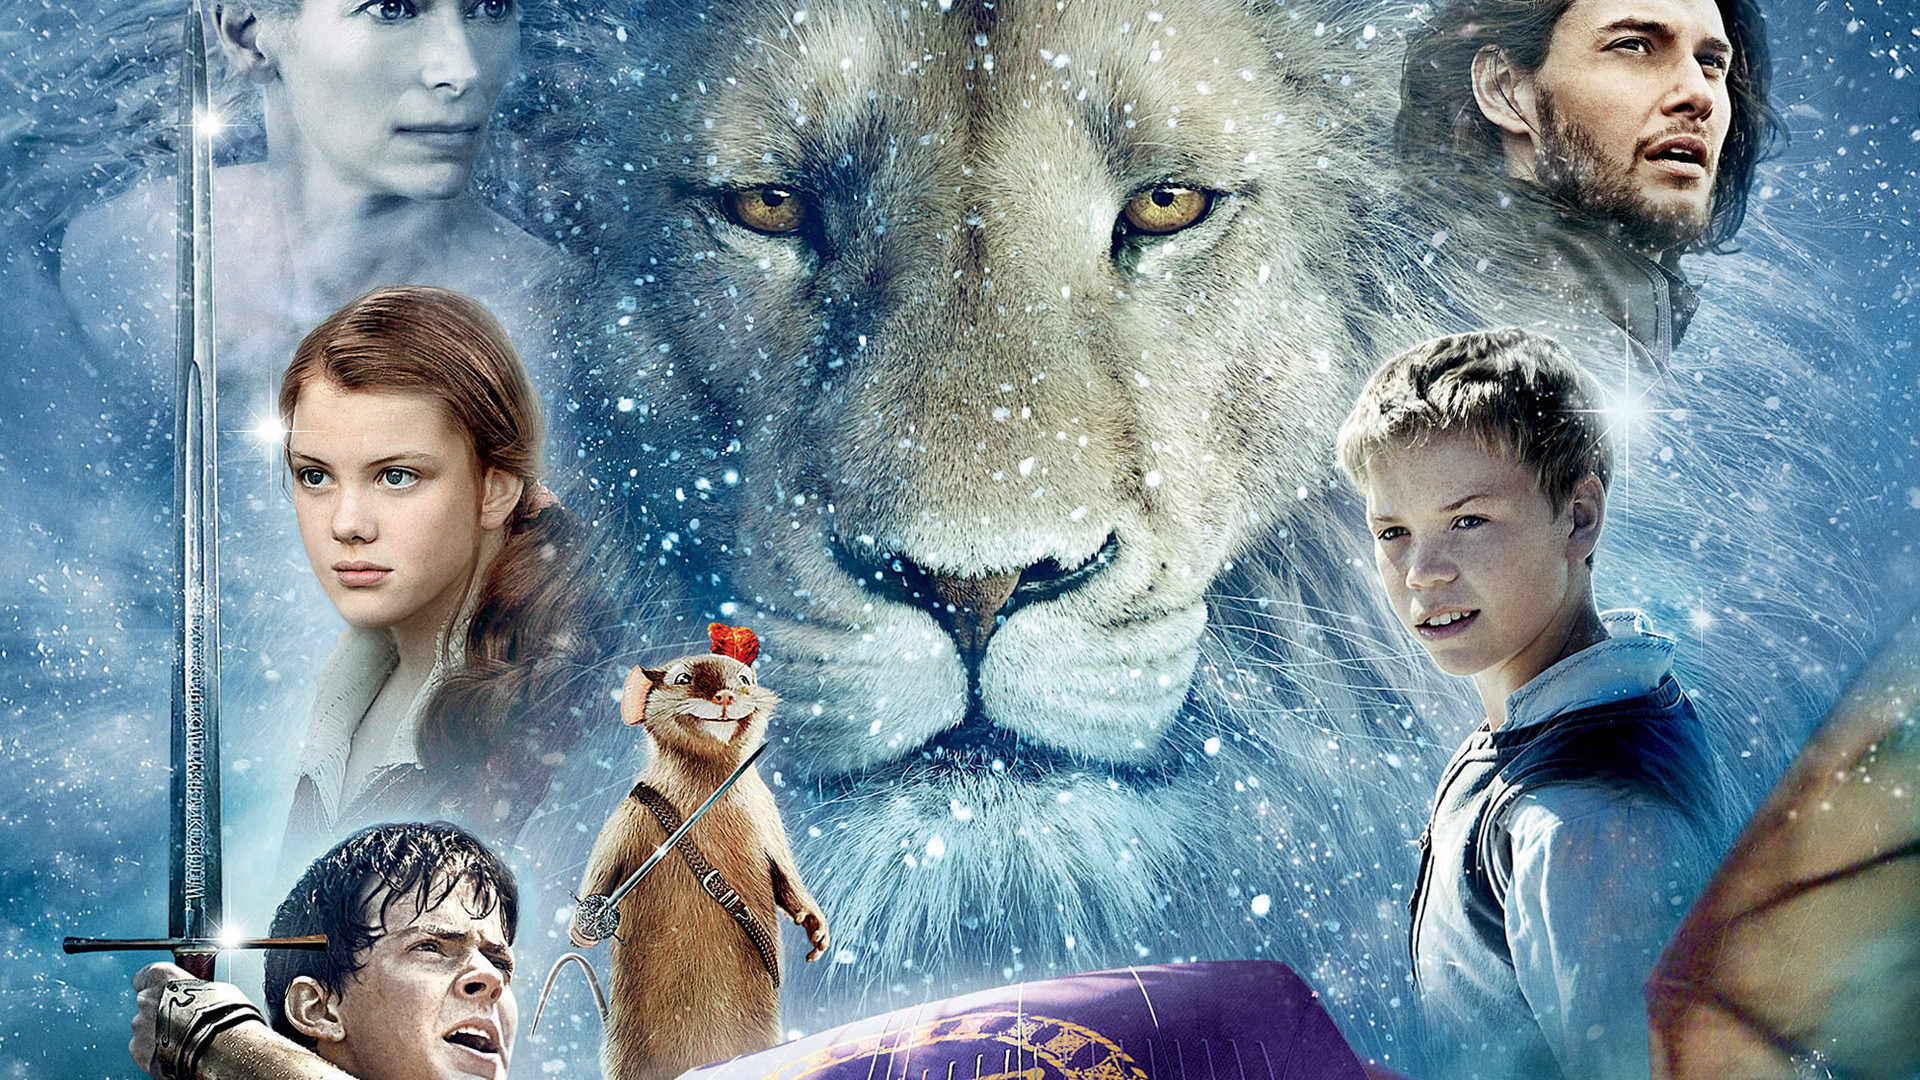 1920x1080 The Chronicles of Narnia: The Voyage of the Dawn Treader HD Wallpaper |  Hintergrund |  | ID:794717 - Wallpaper Abyss